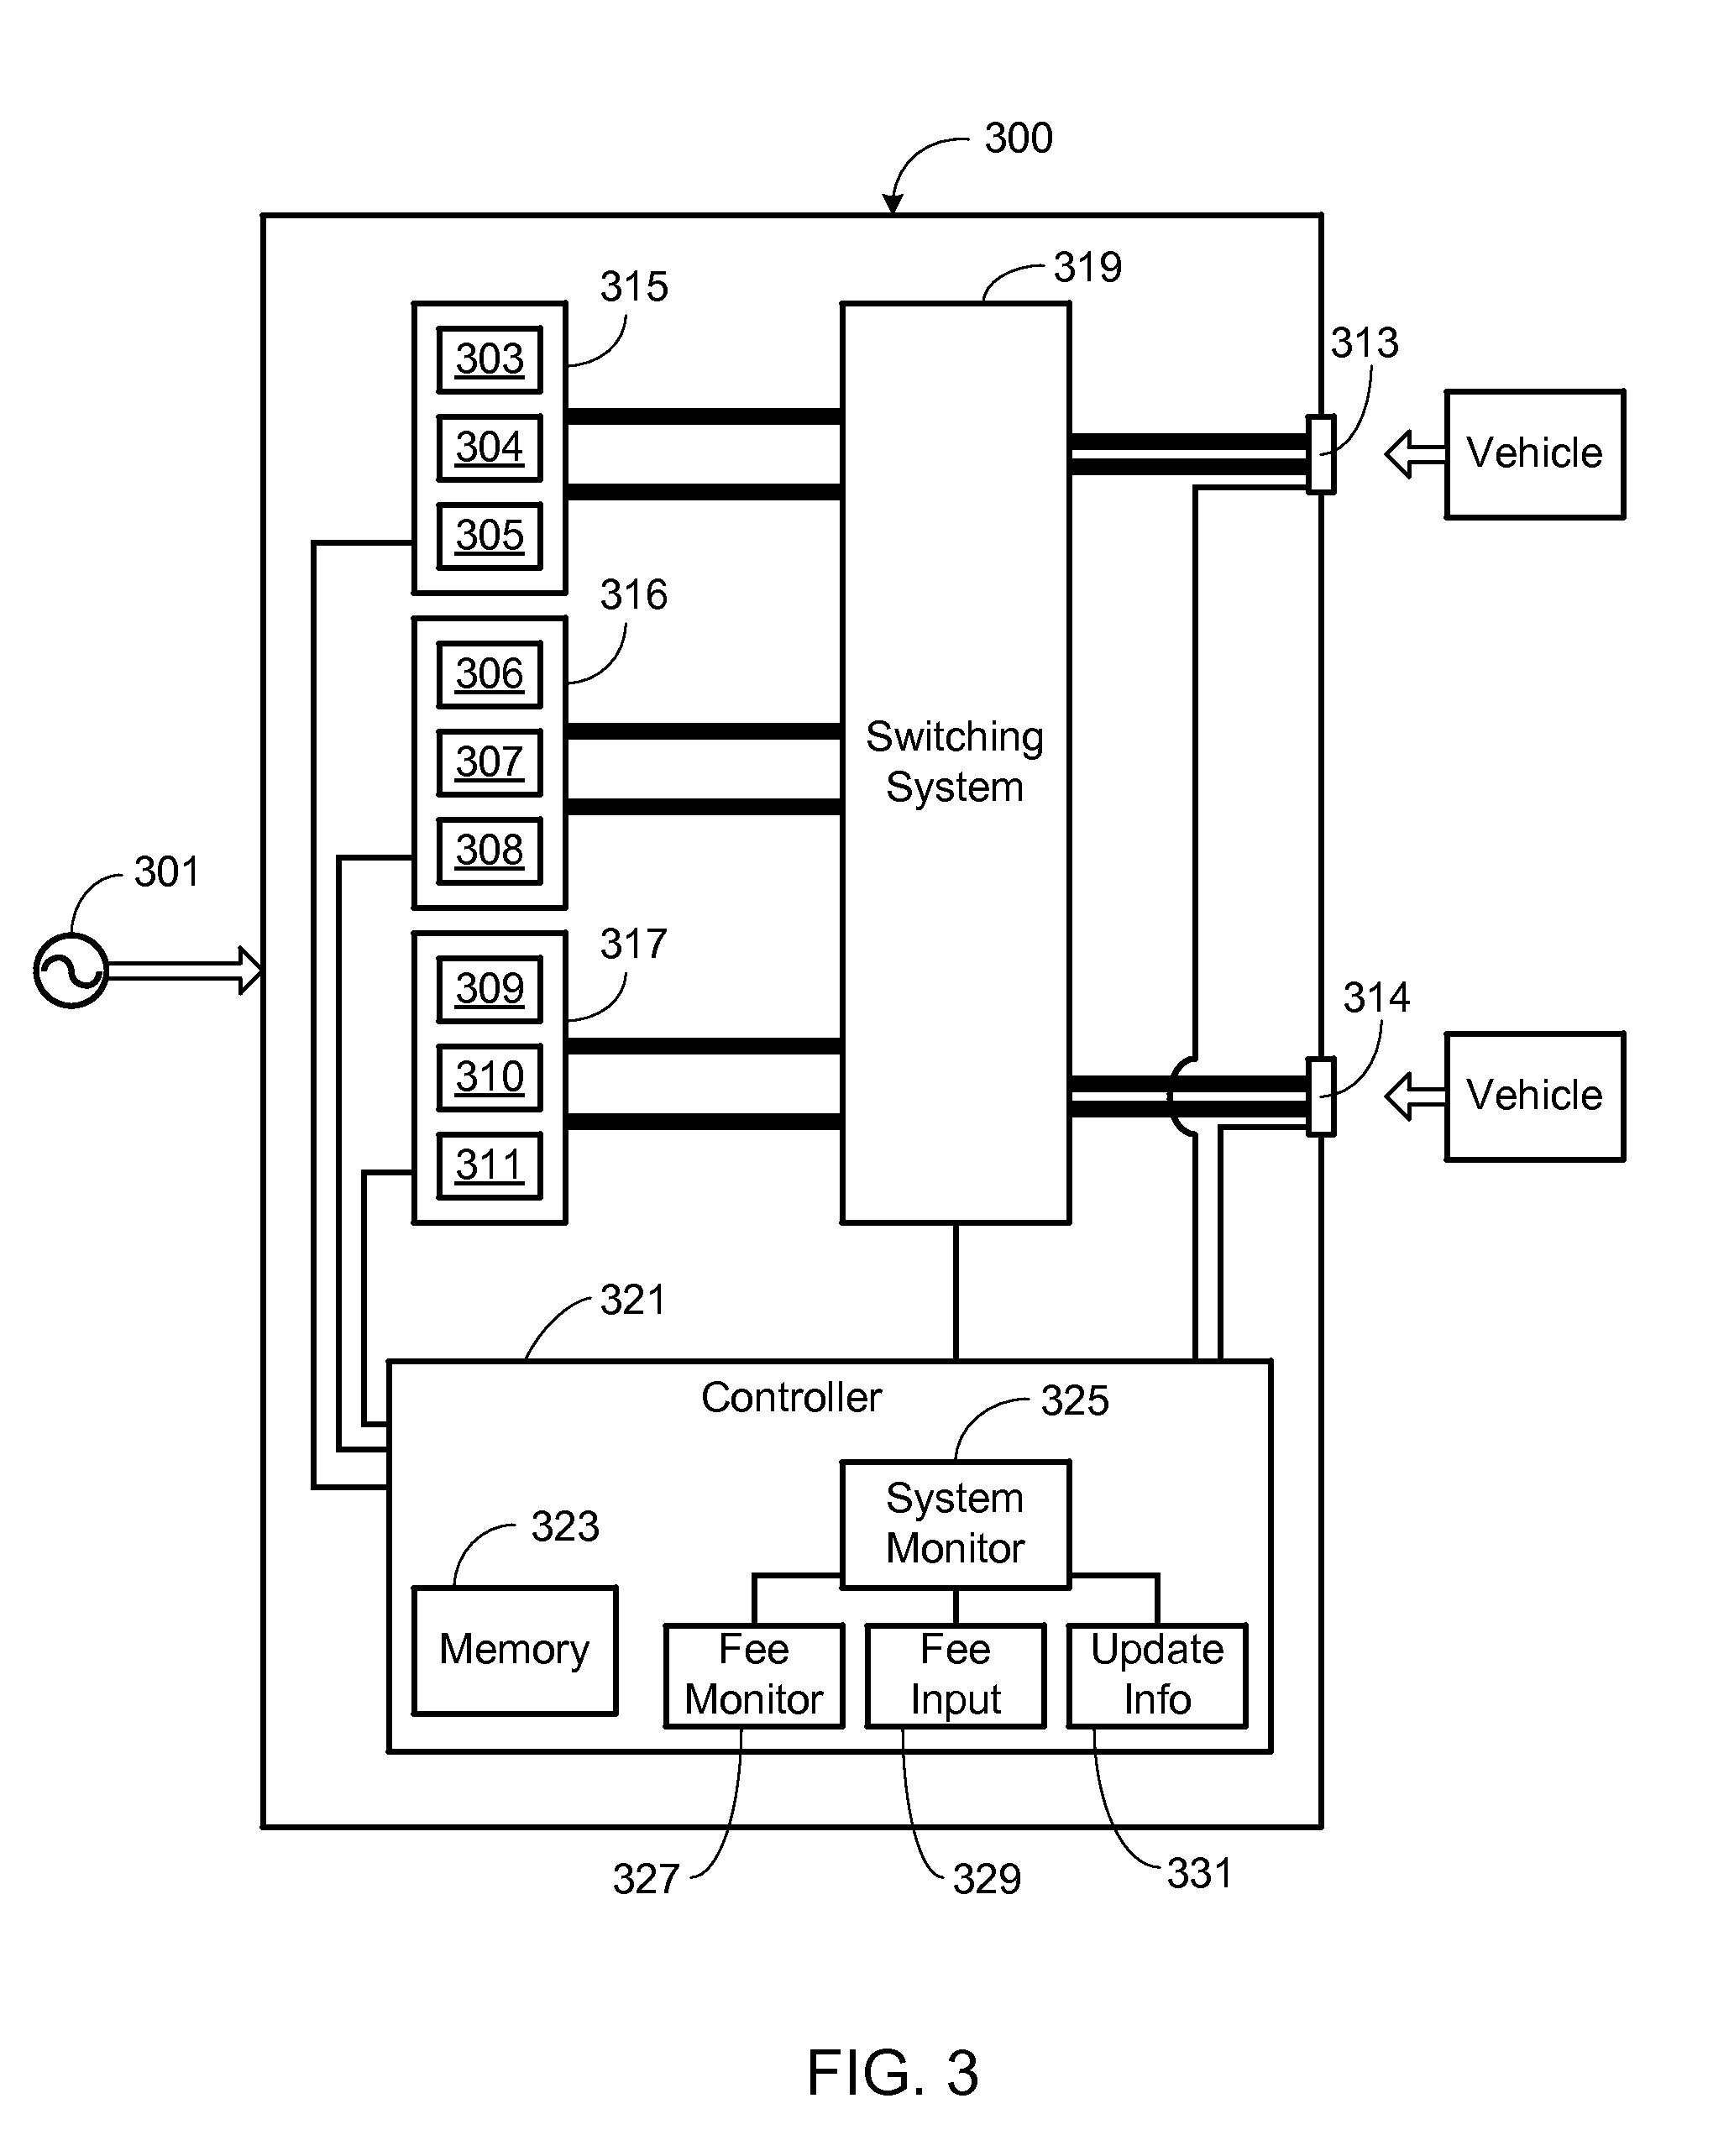 Method of Operating a Multiport Vehicle Charging System